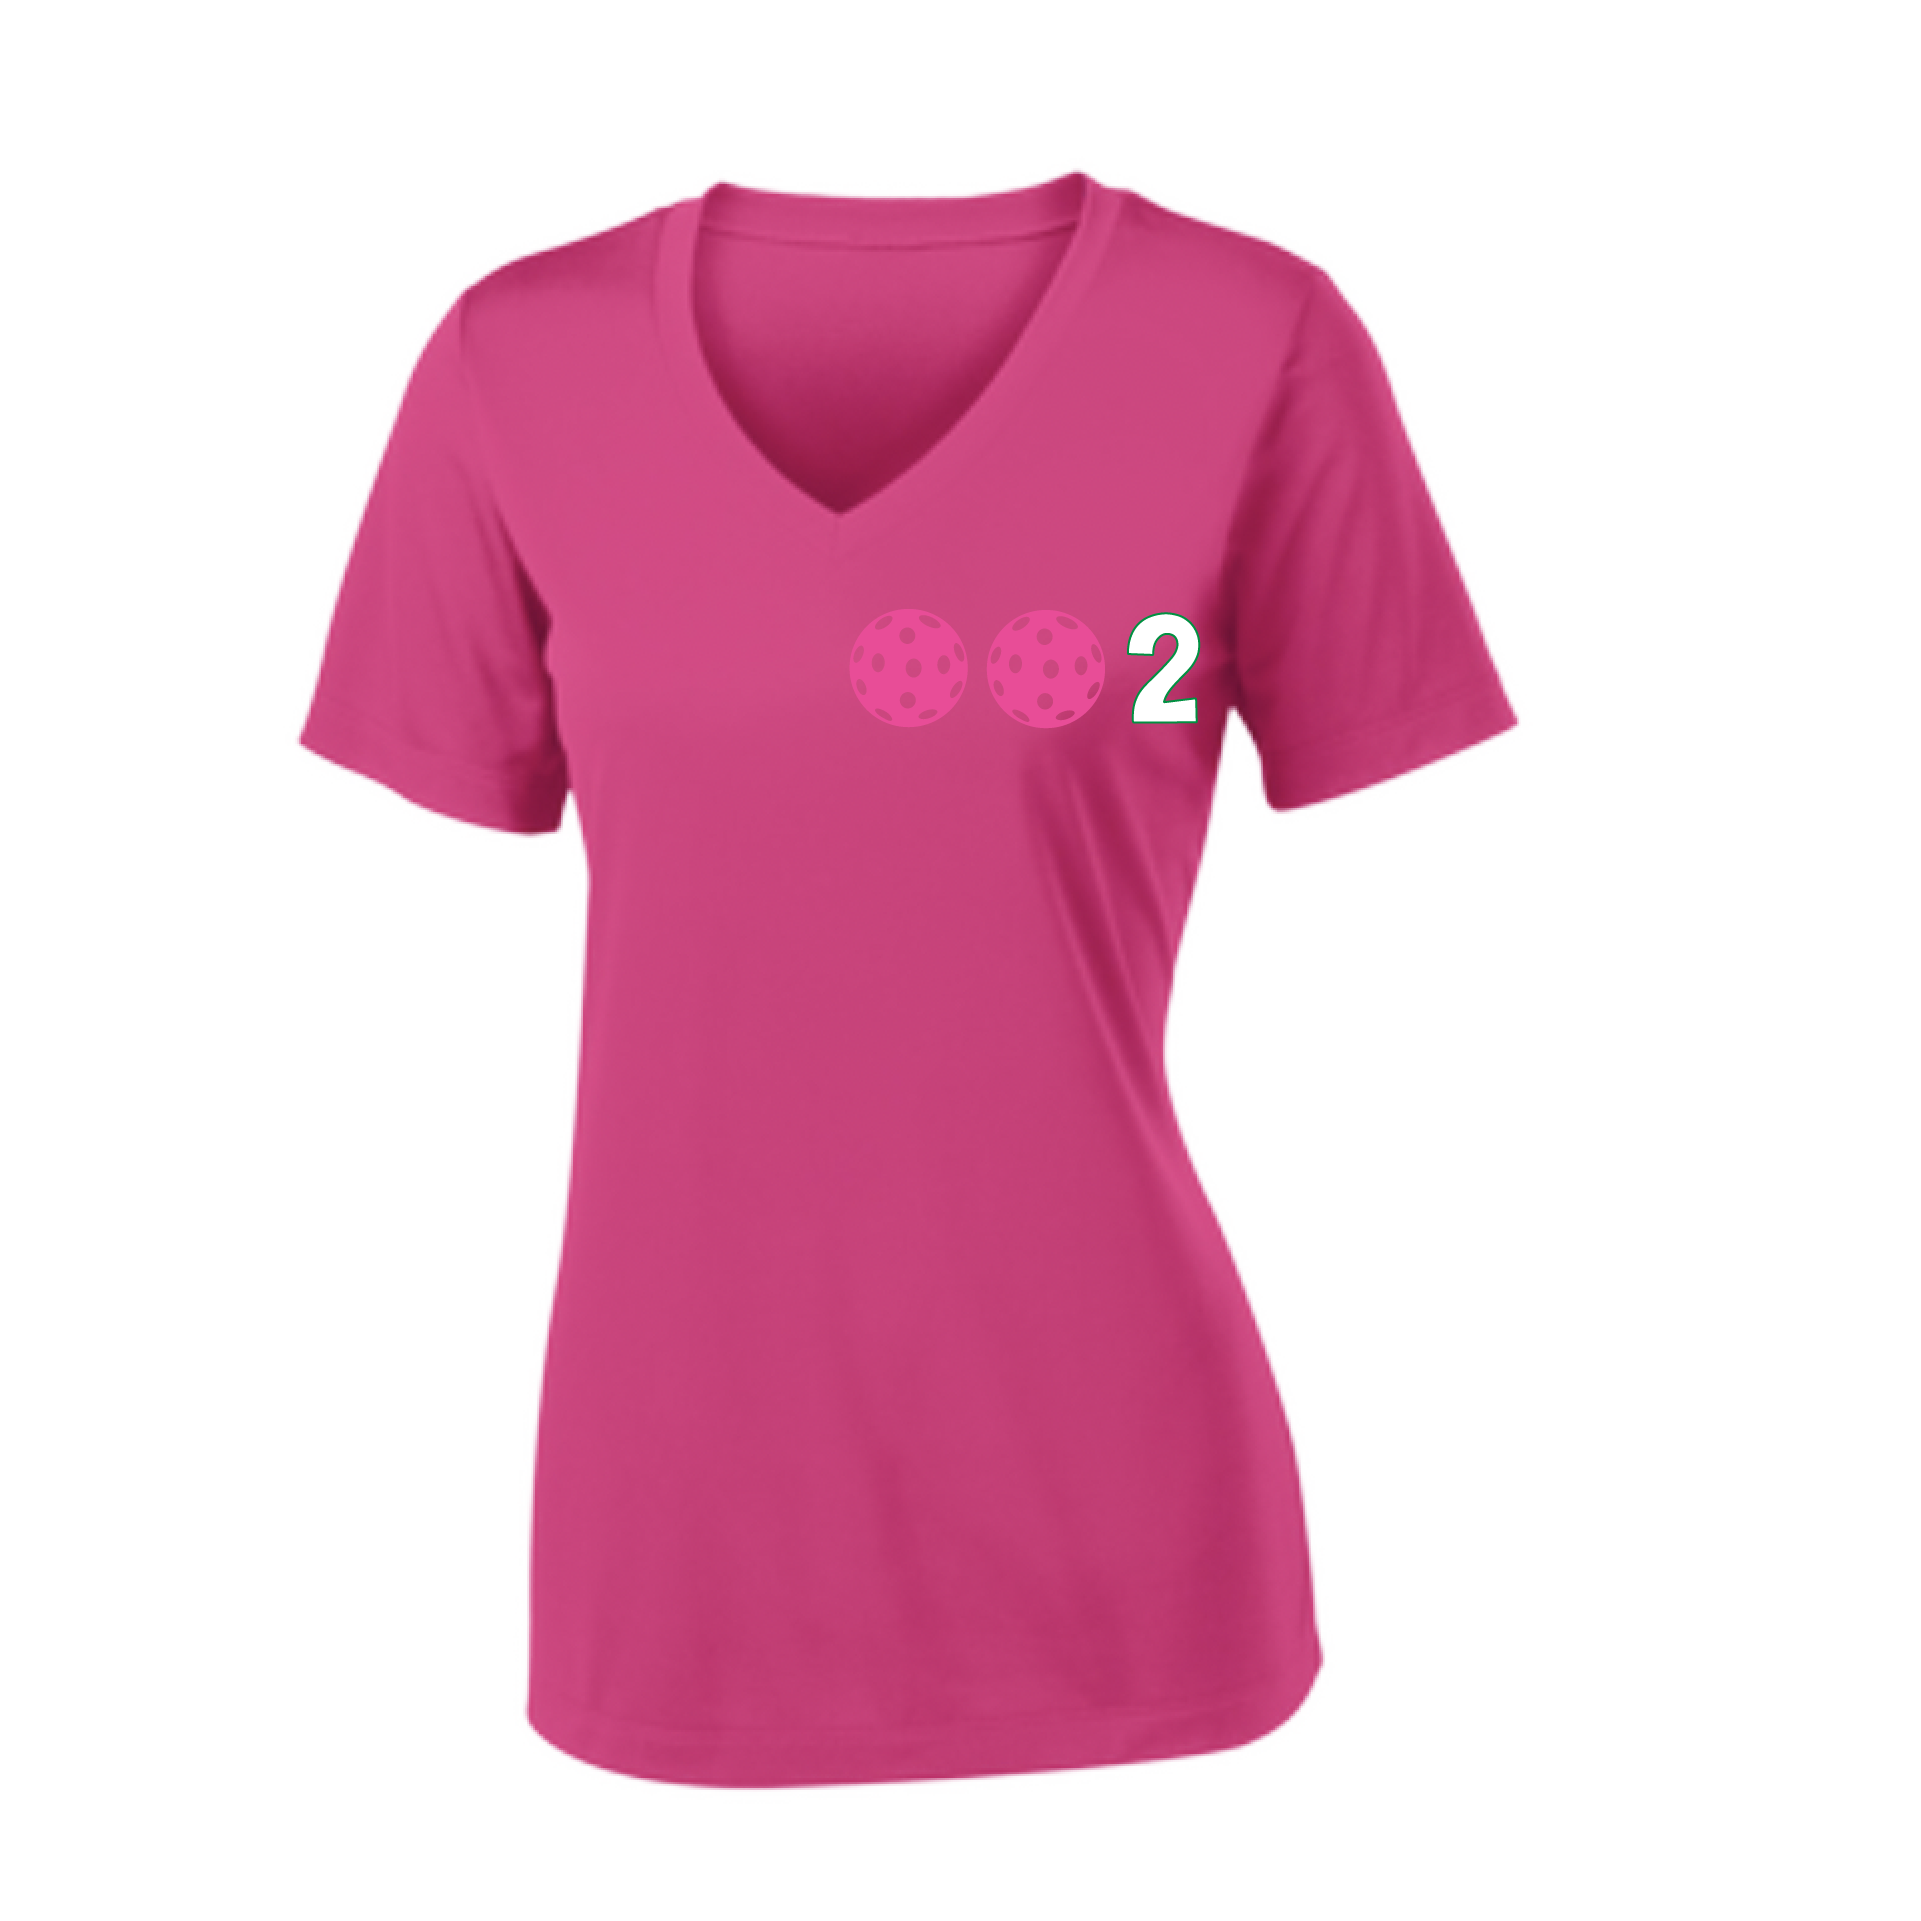 Design: 002 with Customizable Ball Colors (Yellow, Pink, White)  Women's Style: Short-Sleeve V-Neck  Shirts are lightweight, roomy and highly breathable. These moisture-wicking shirts are designed for athletic performance. They feature PosiCharge technology to lock in color and prevent logos from fading. Removable tag and set-in sleeves for comfor